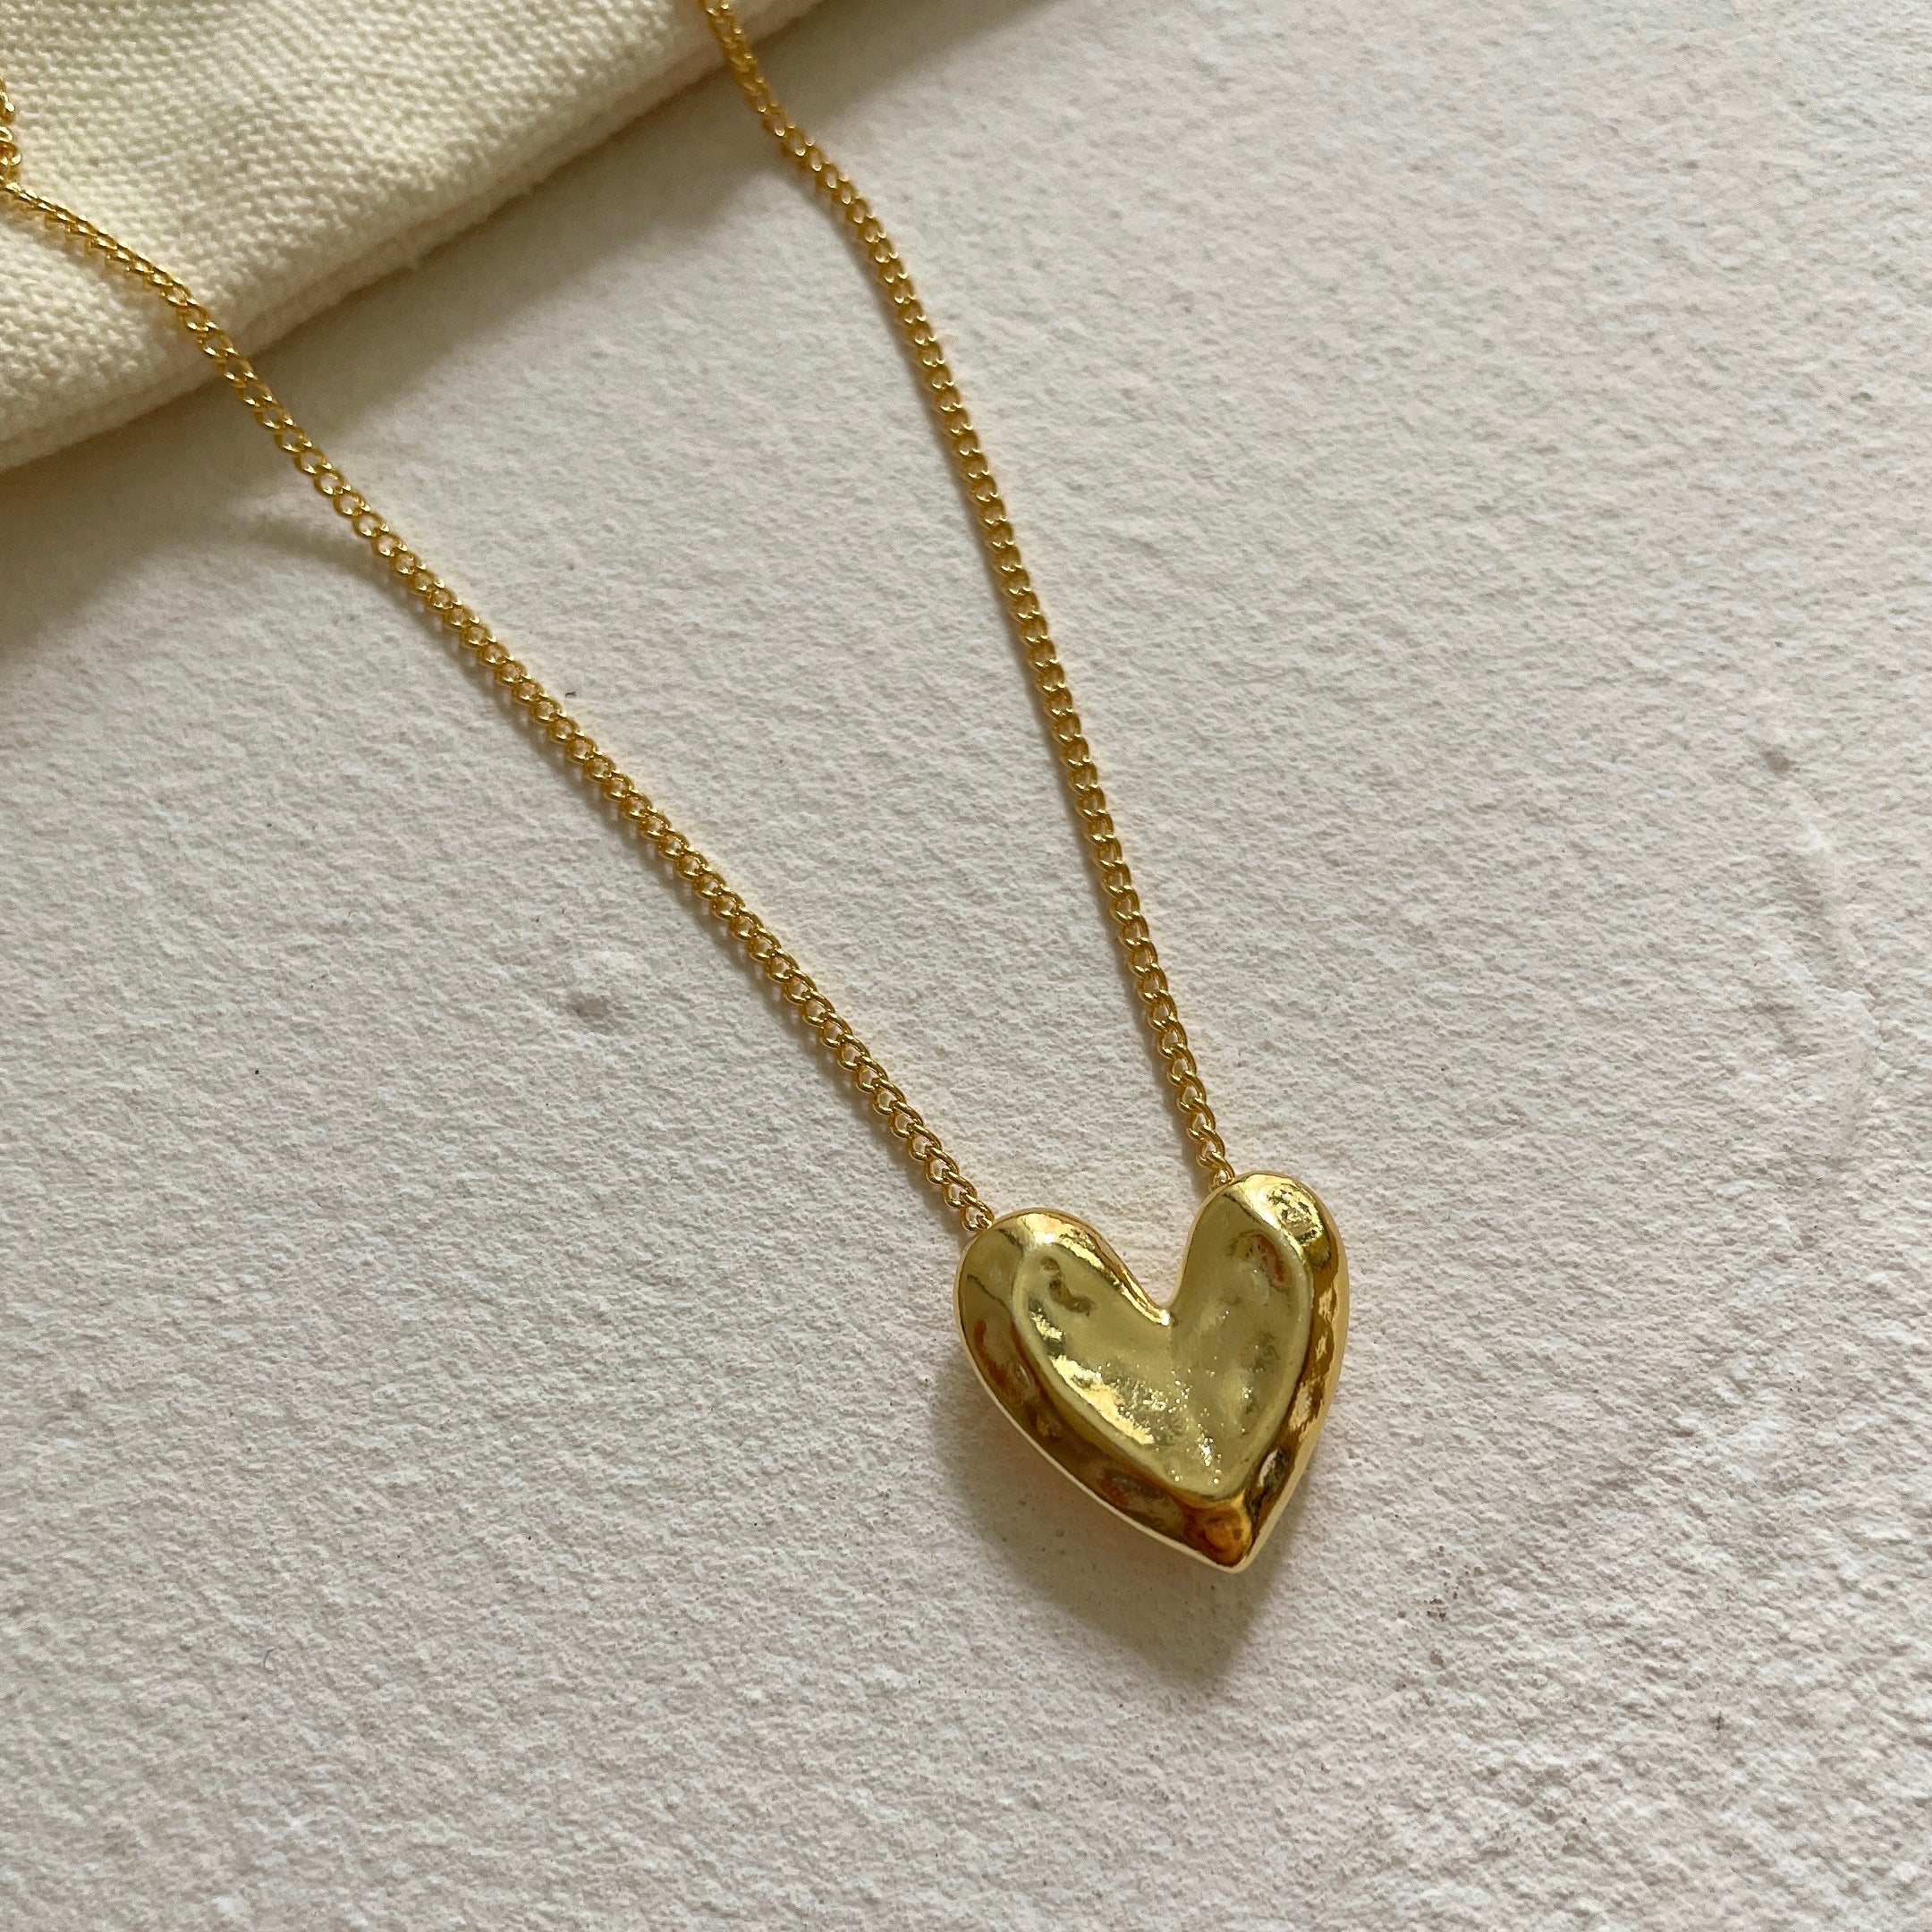 18K Gold Plated Heart Necklace Gift wedding influencer styling KOL / Youtuber / Celebrity / Fashion Icon picked